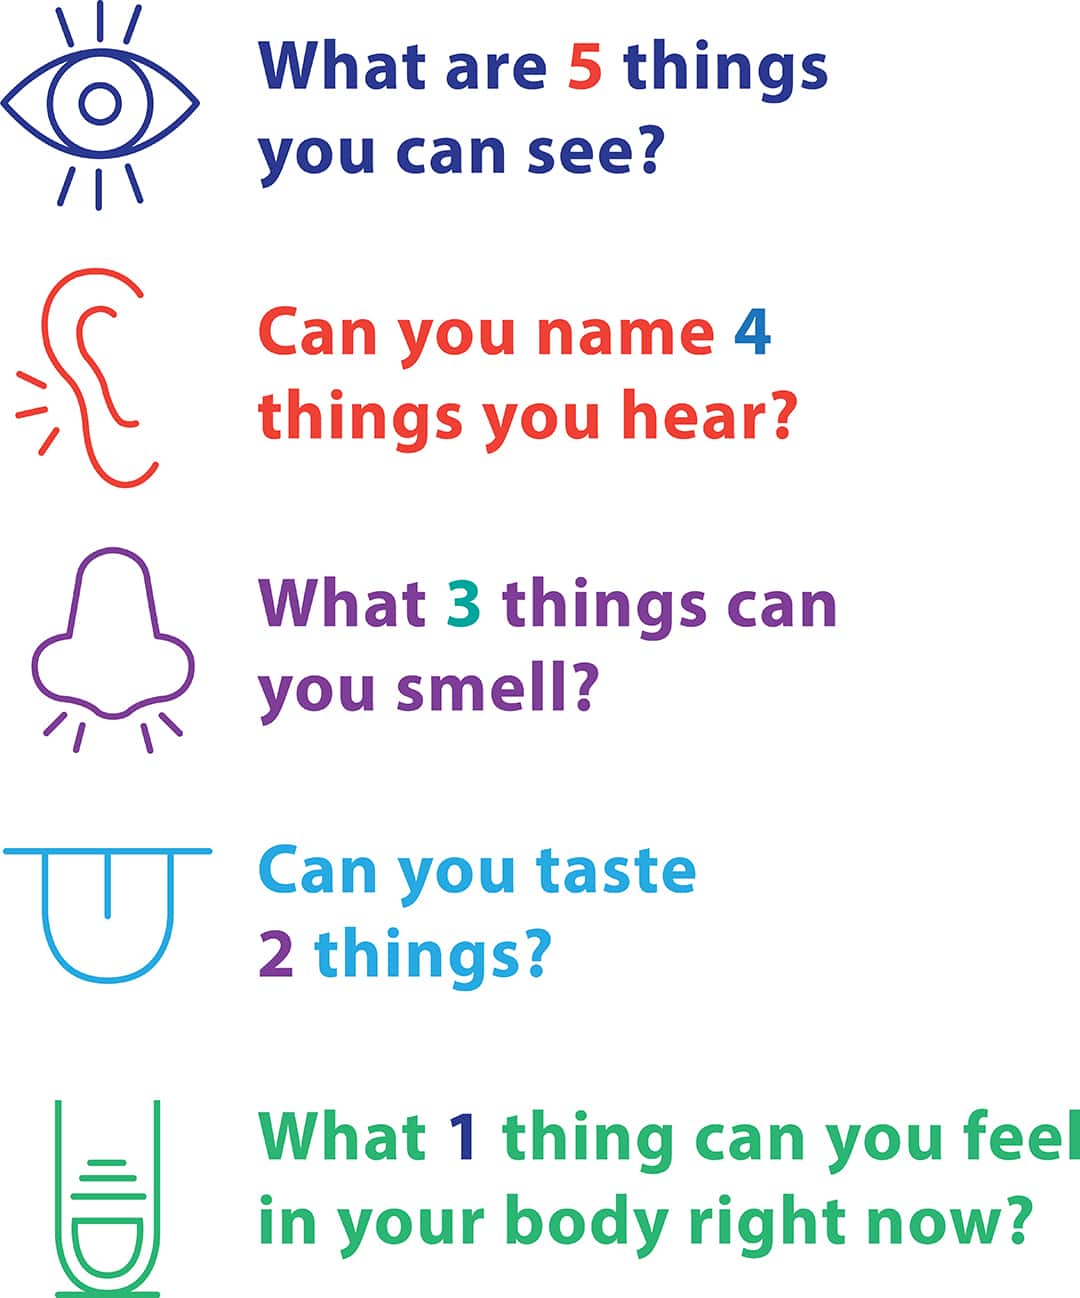 Help children manage stress with the 5 Senses game, from Birthways in Chicago